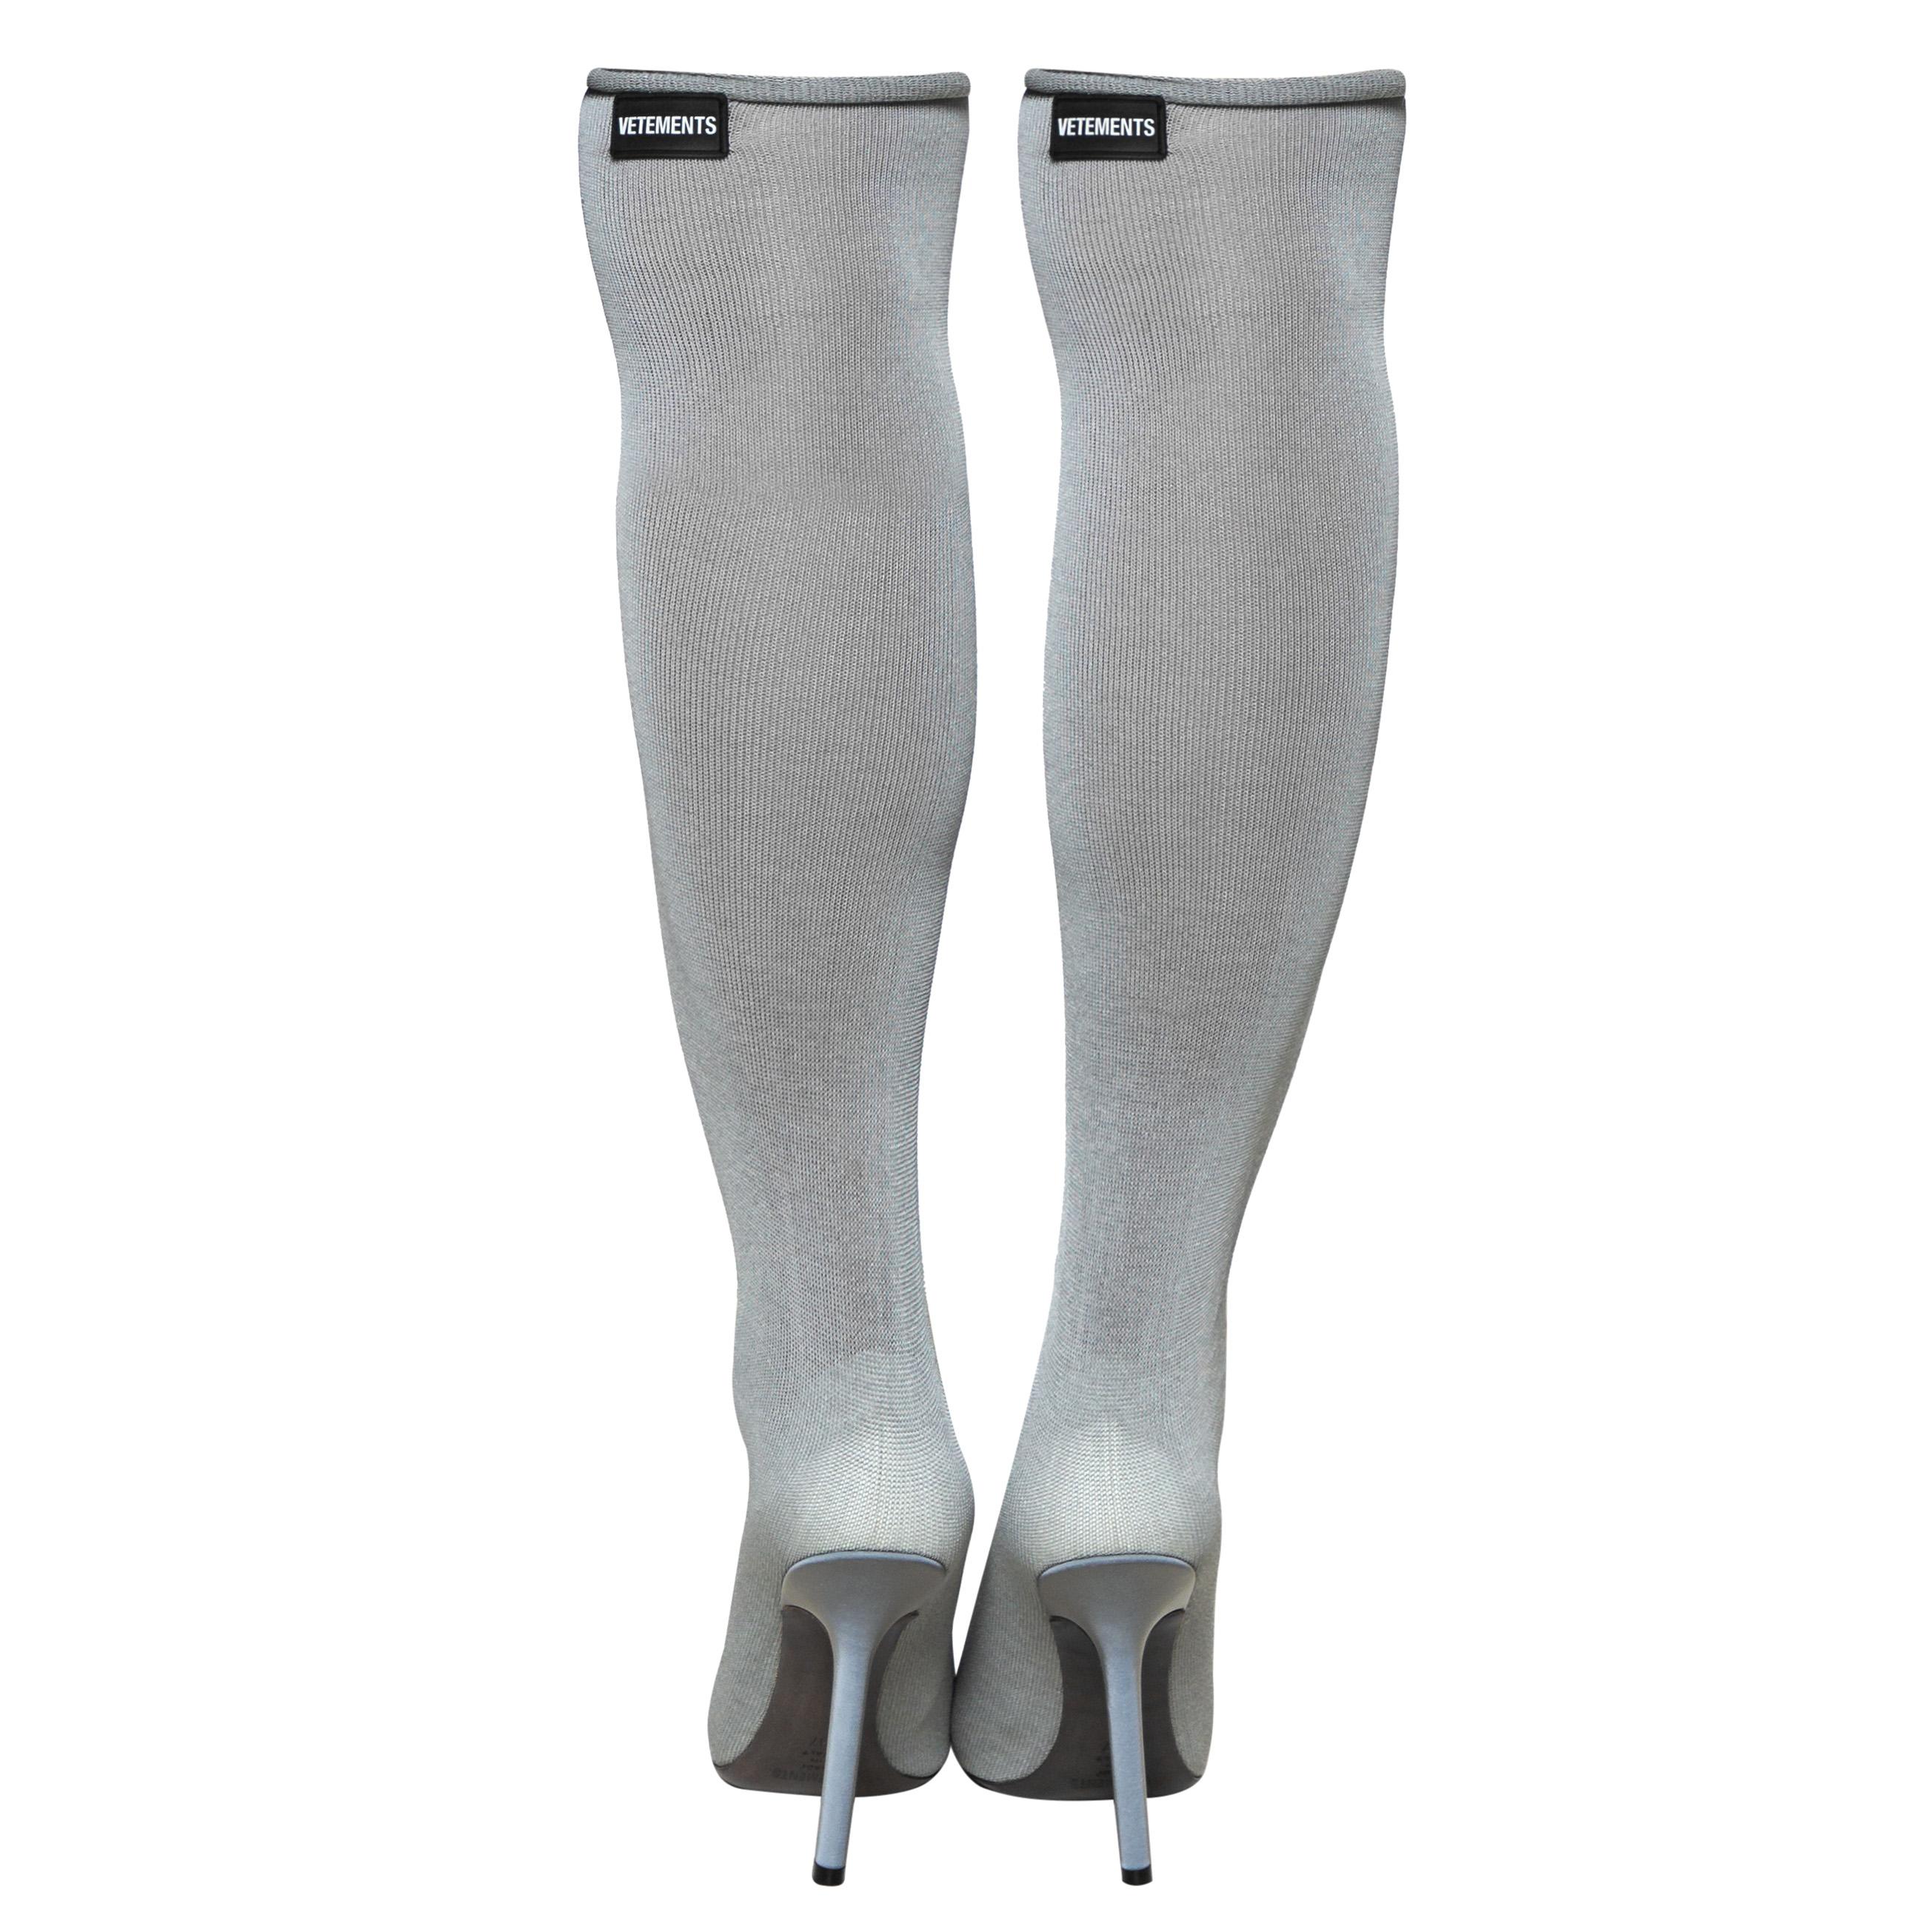 Vetements Grey Stretch Fabric Knee High Boots Size 37 In Good Condition For Sale In Dubai, Al Qouz 2